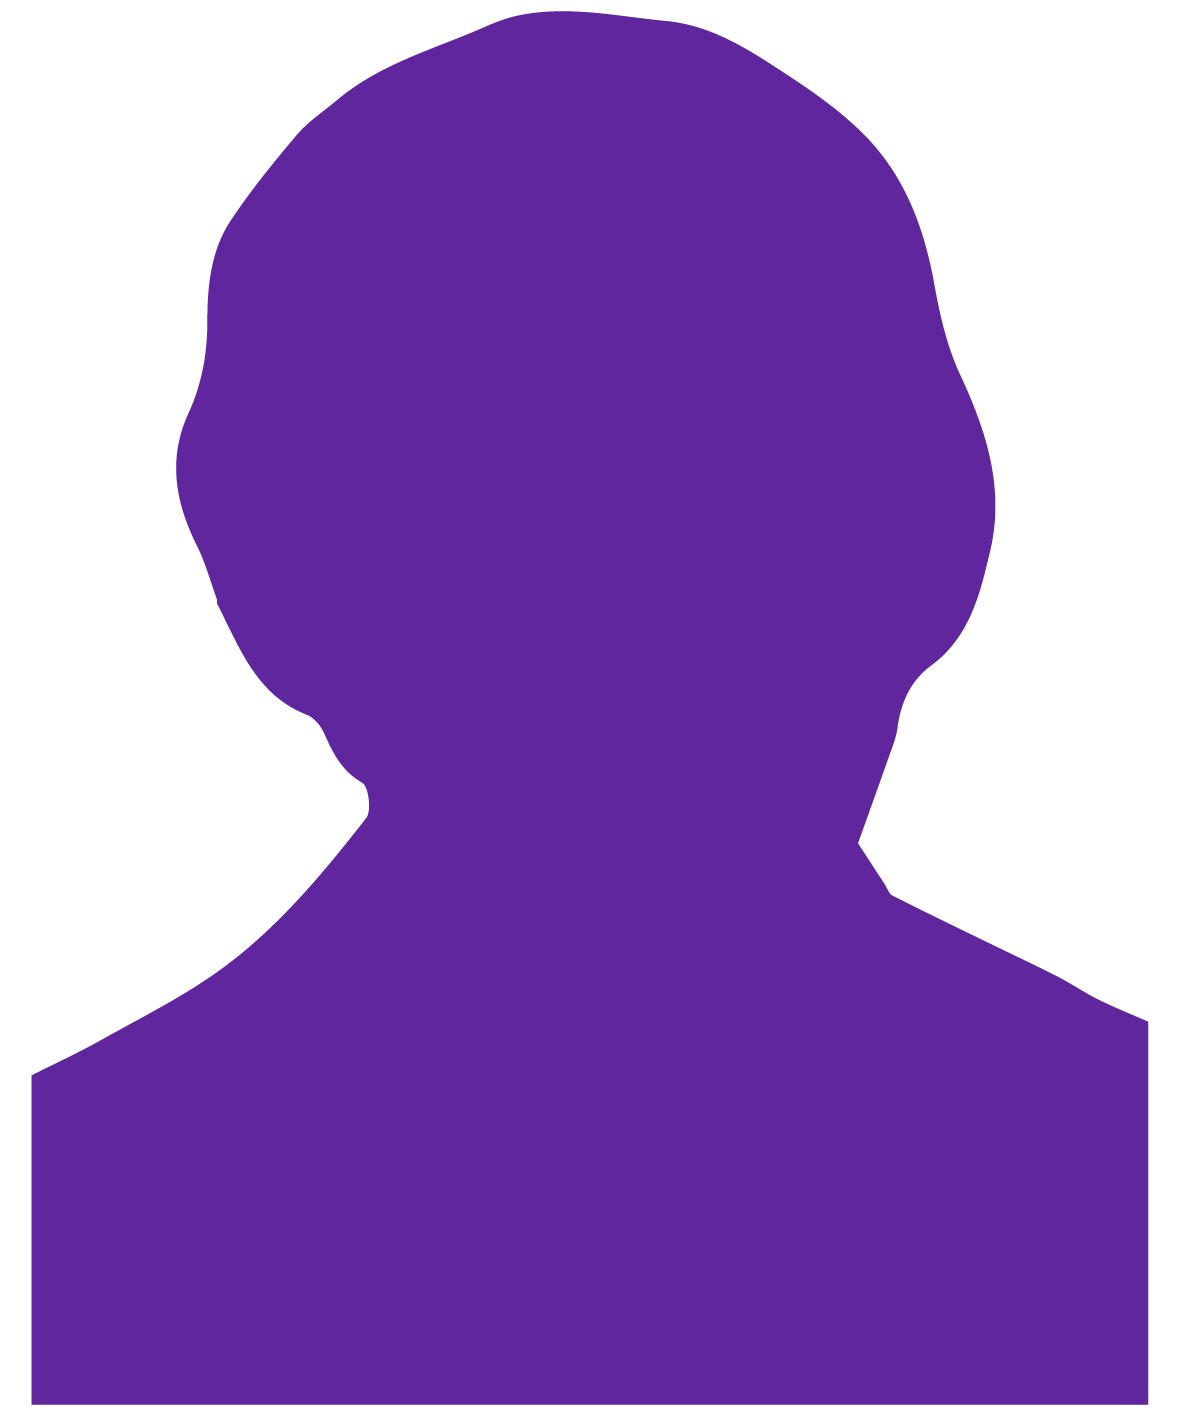 Purple silhouette of Helen Russell or Archdale